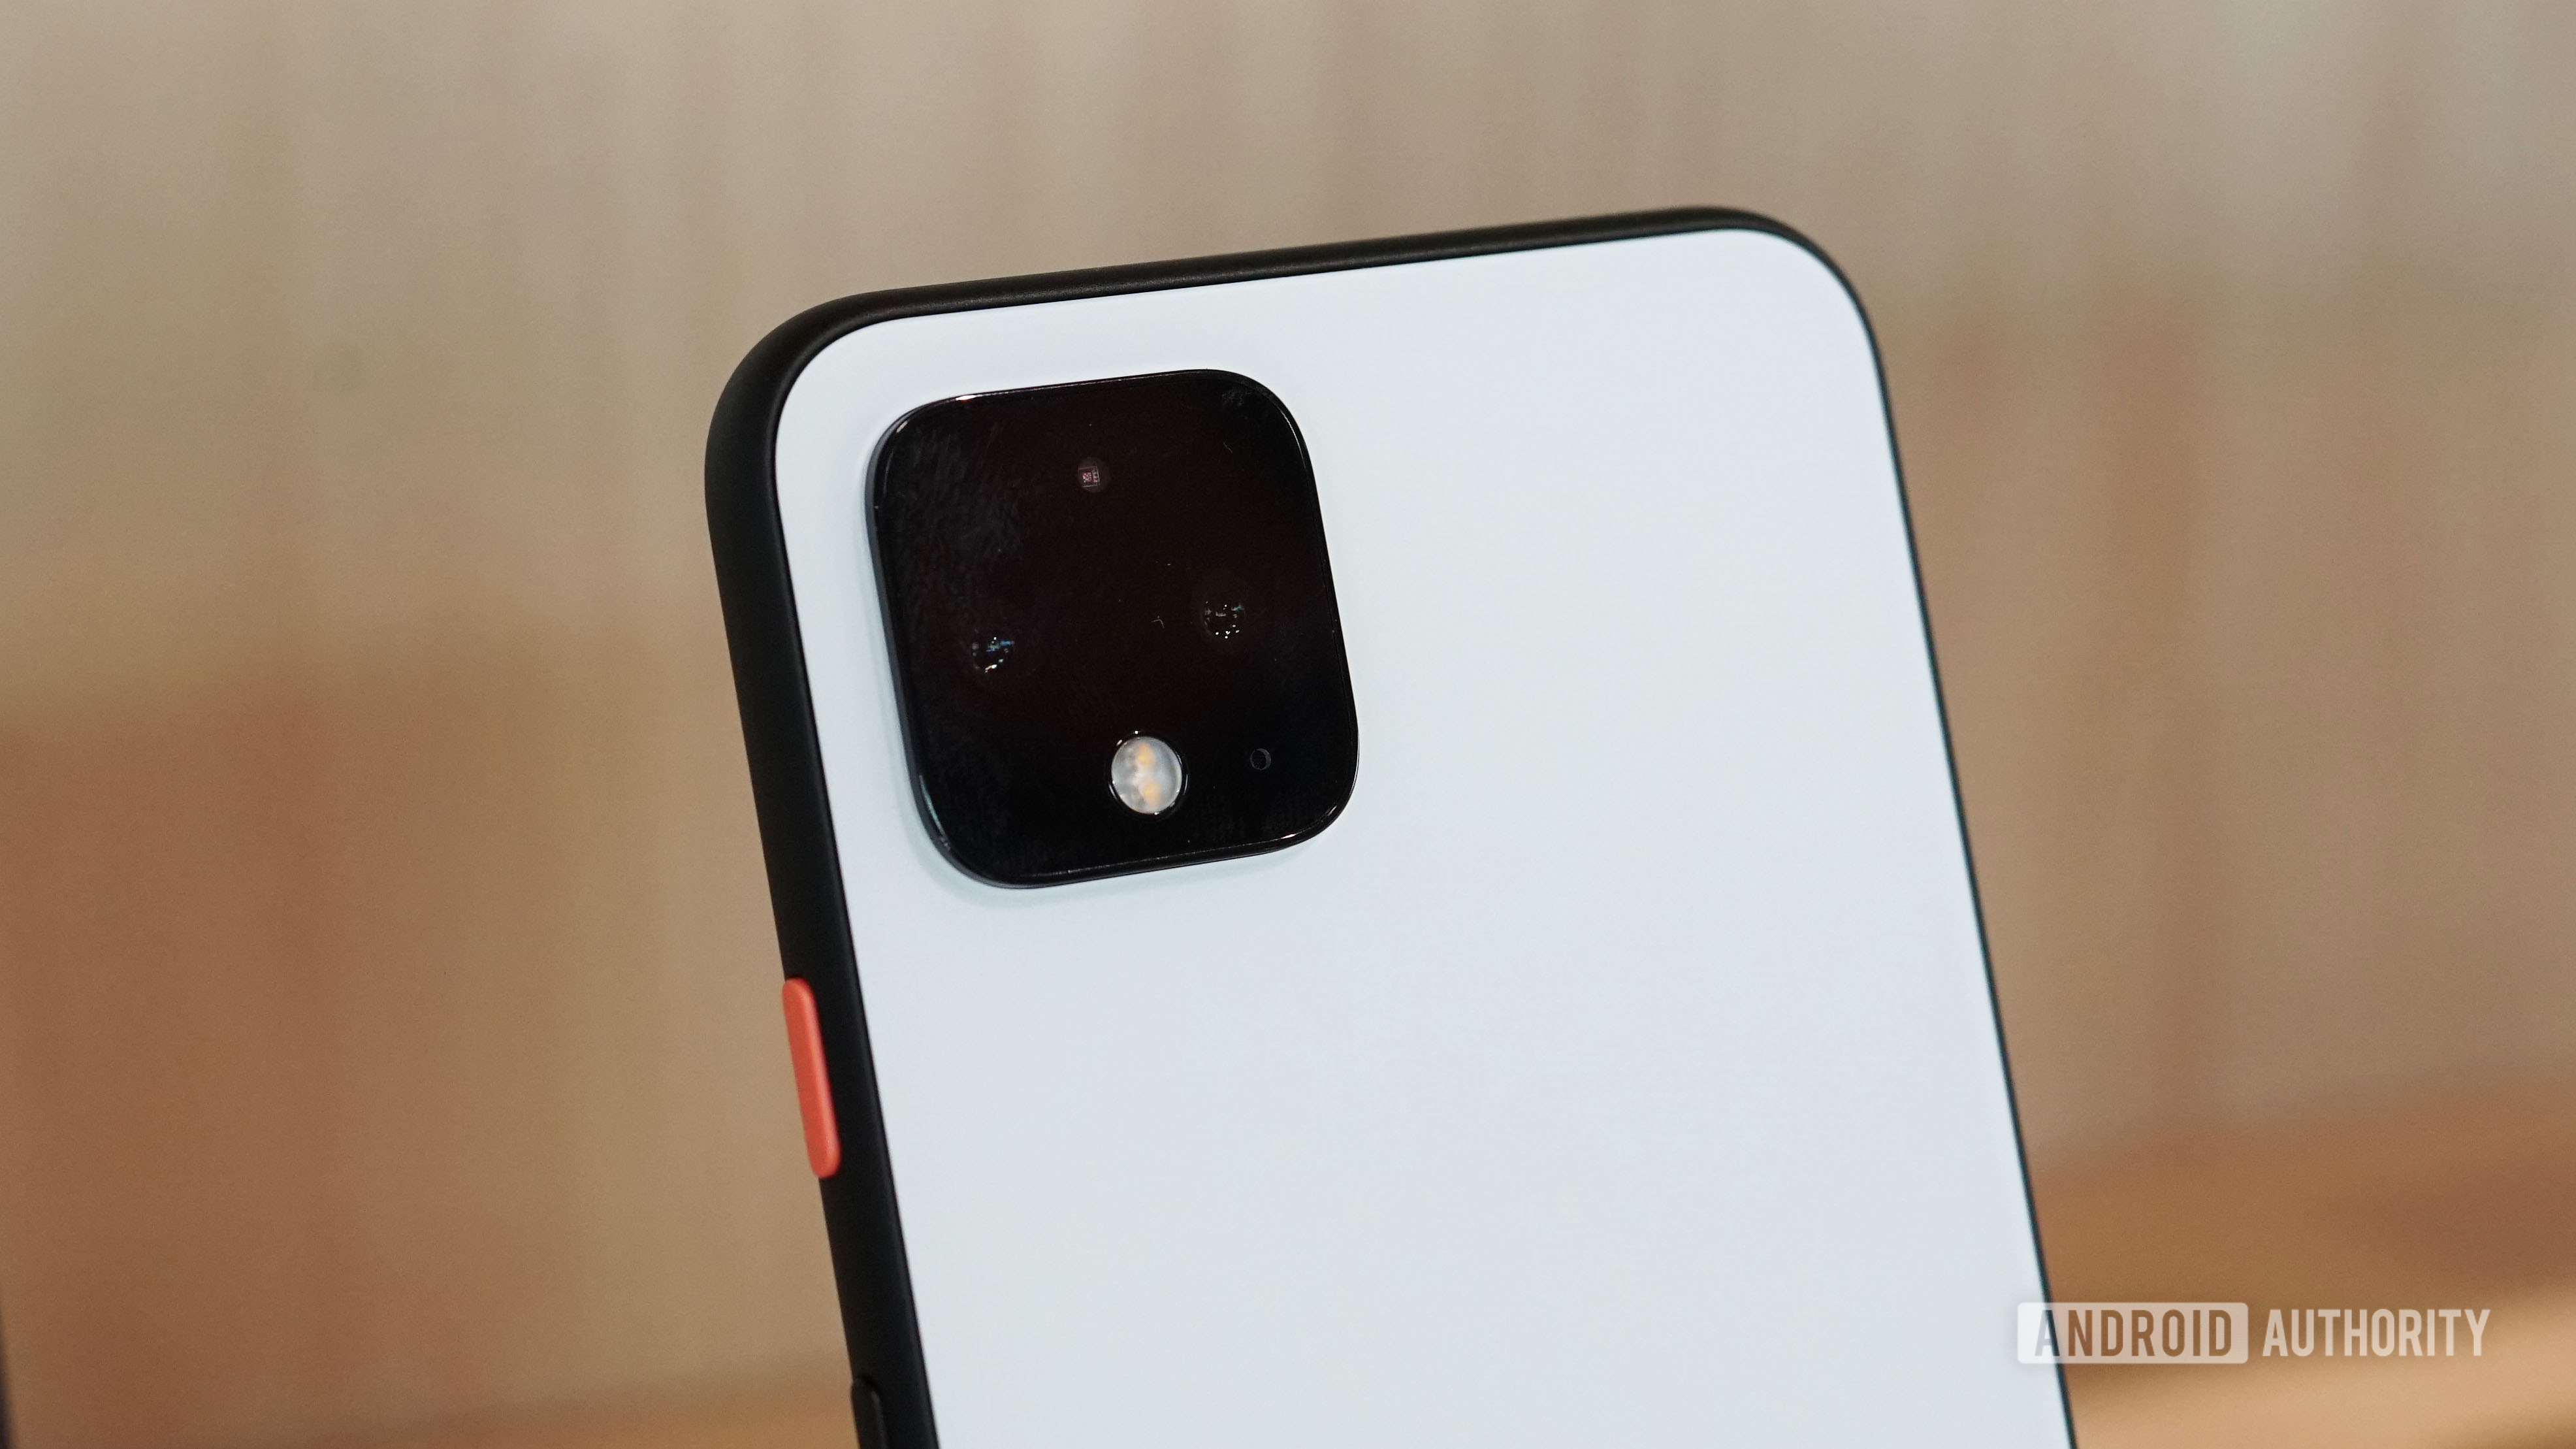 Clearly White Google Pixel 4 camera bump